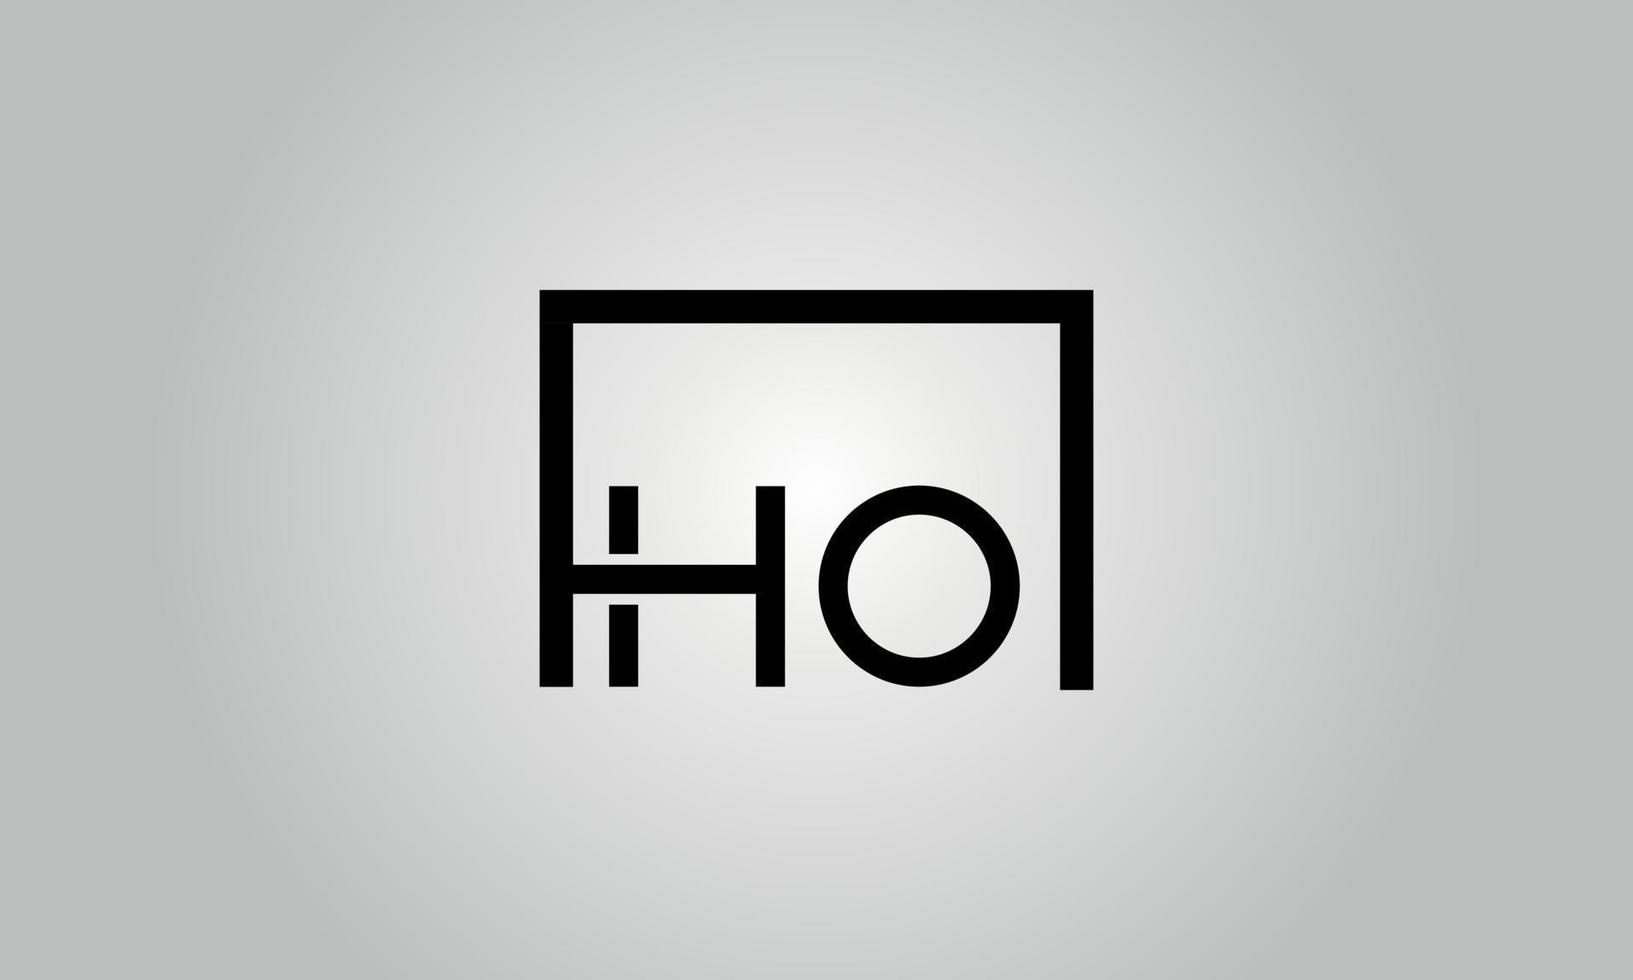 Letter HO logo design. HO logo with square shape in black colors vector free vector template.